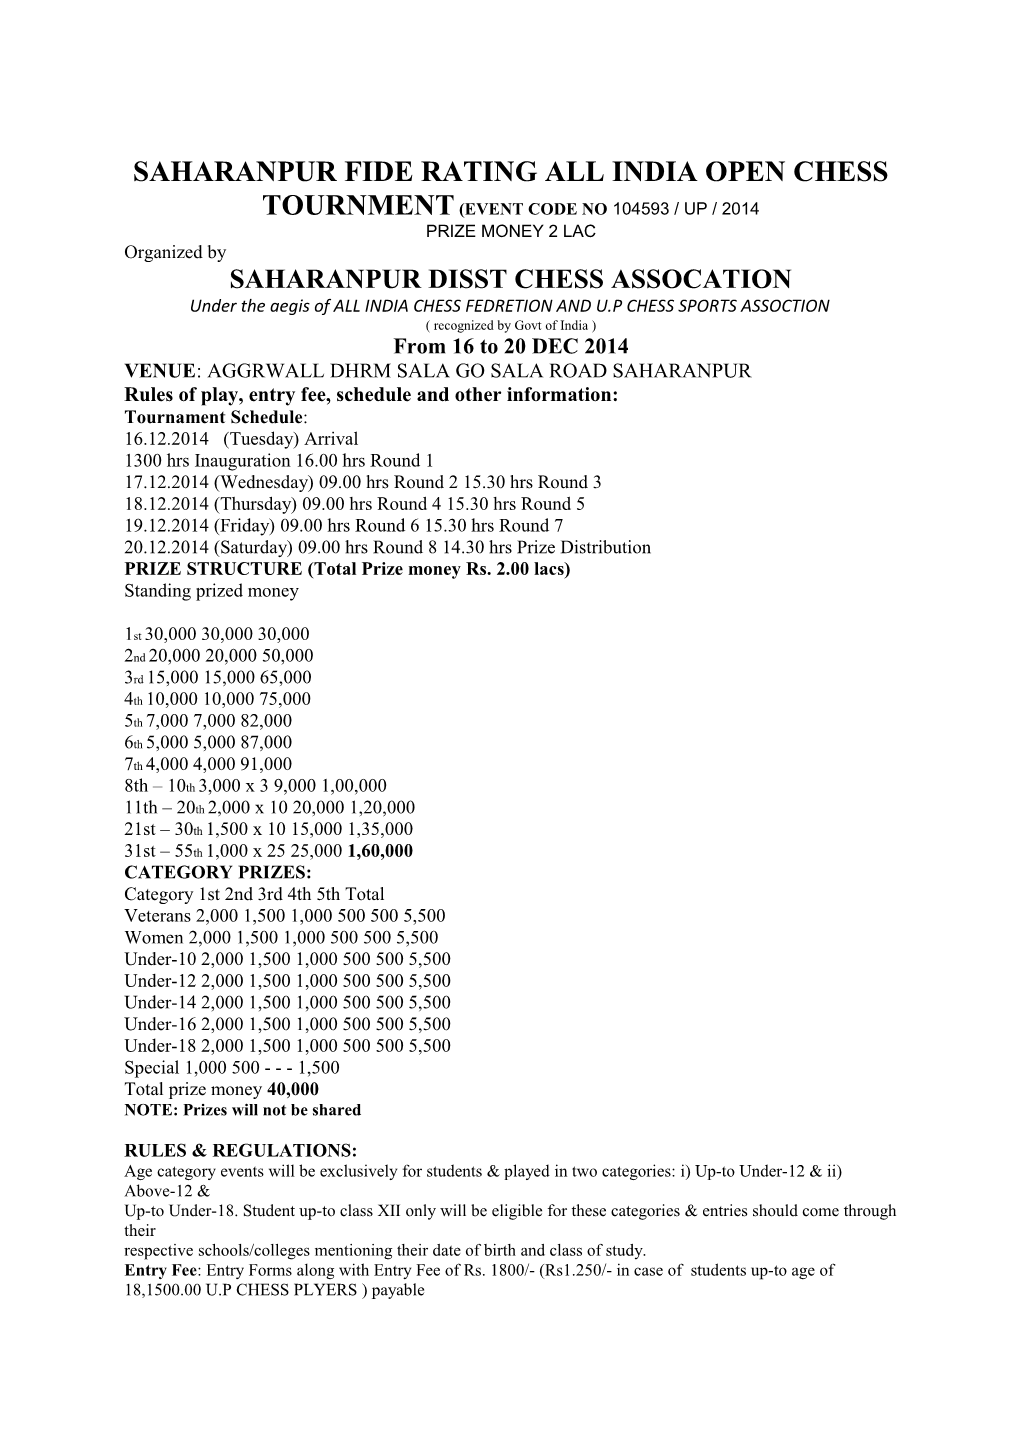 Saharanpur Fide Rating All India Open Chess Tournment (Event Code No 104593 / up / 2014